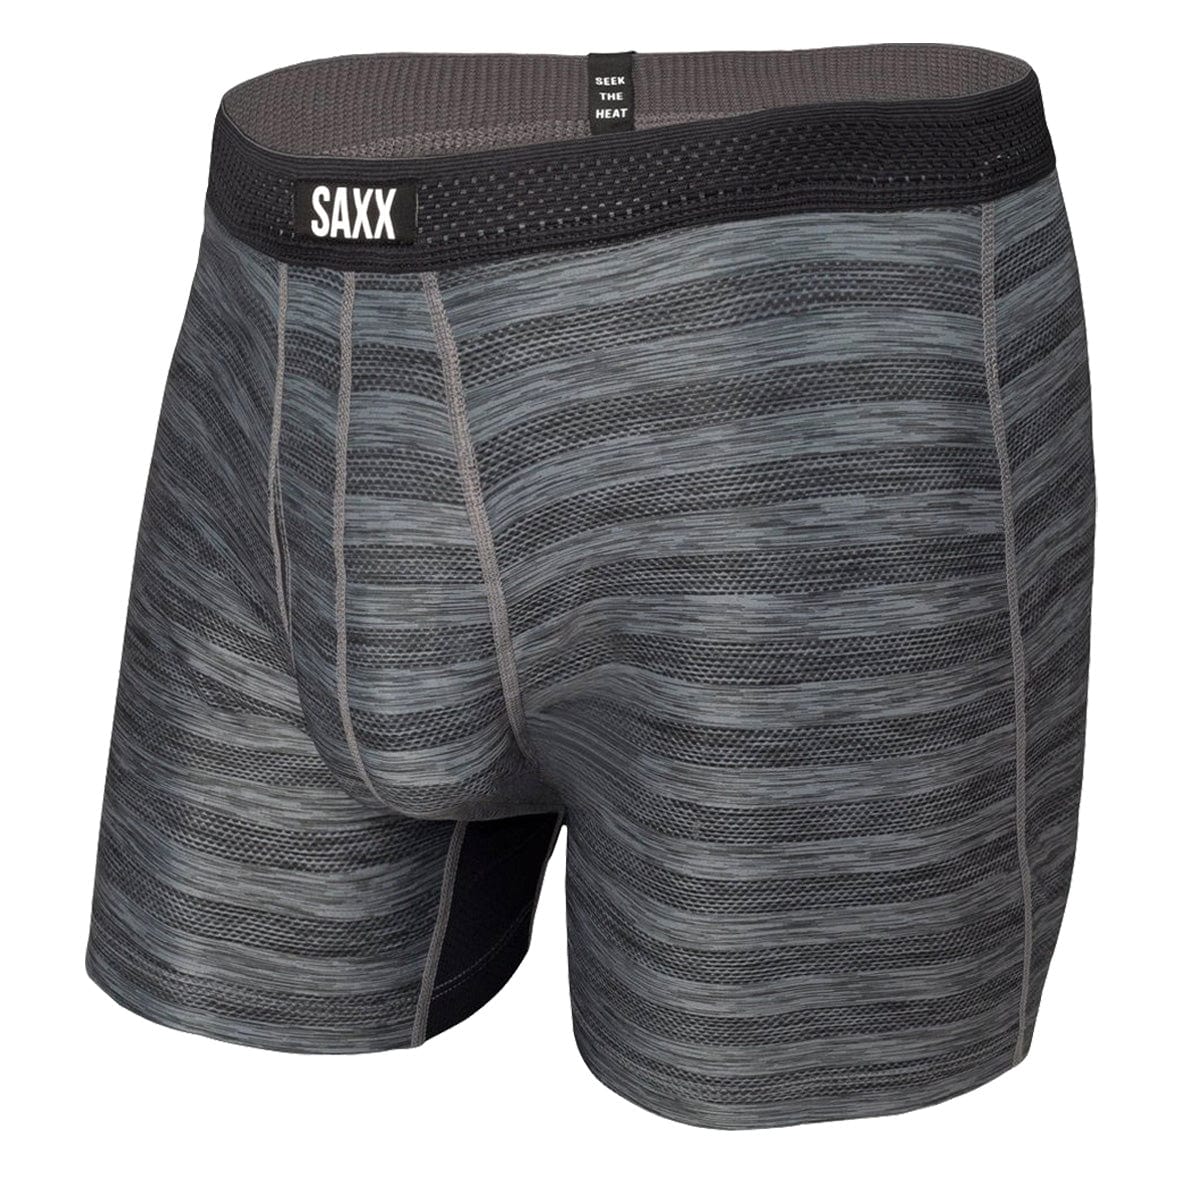 Saxx Hot Shot Boxers - Black Heather - The Hockey Shop Source For Sports